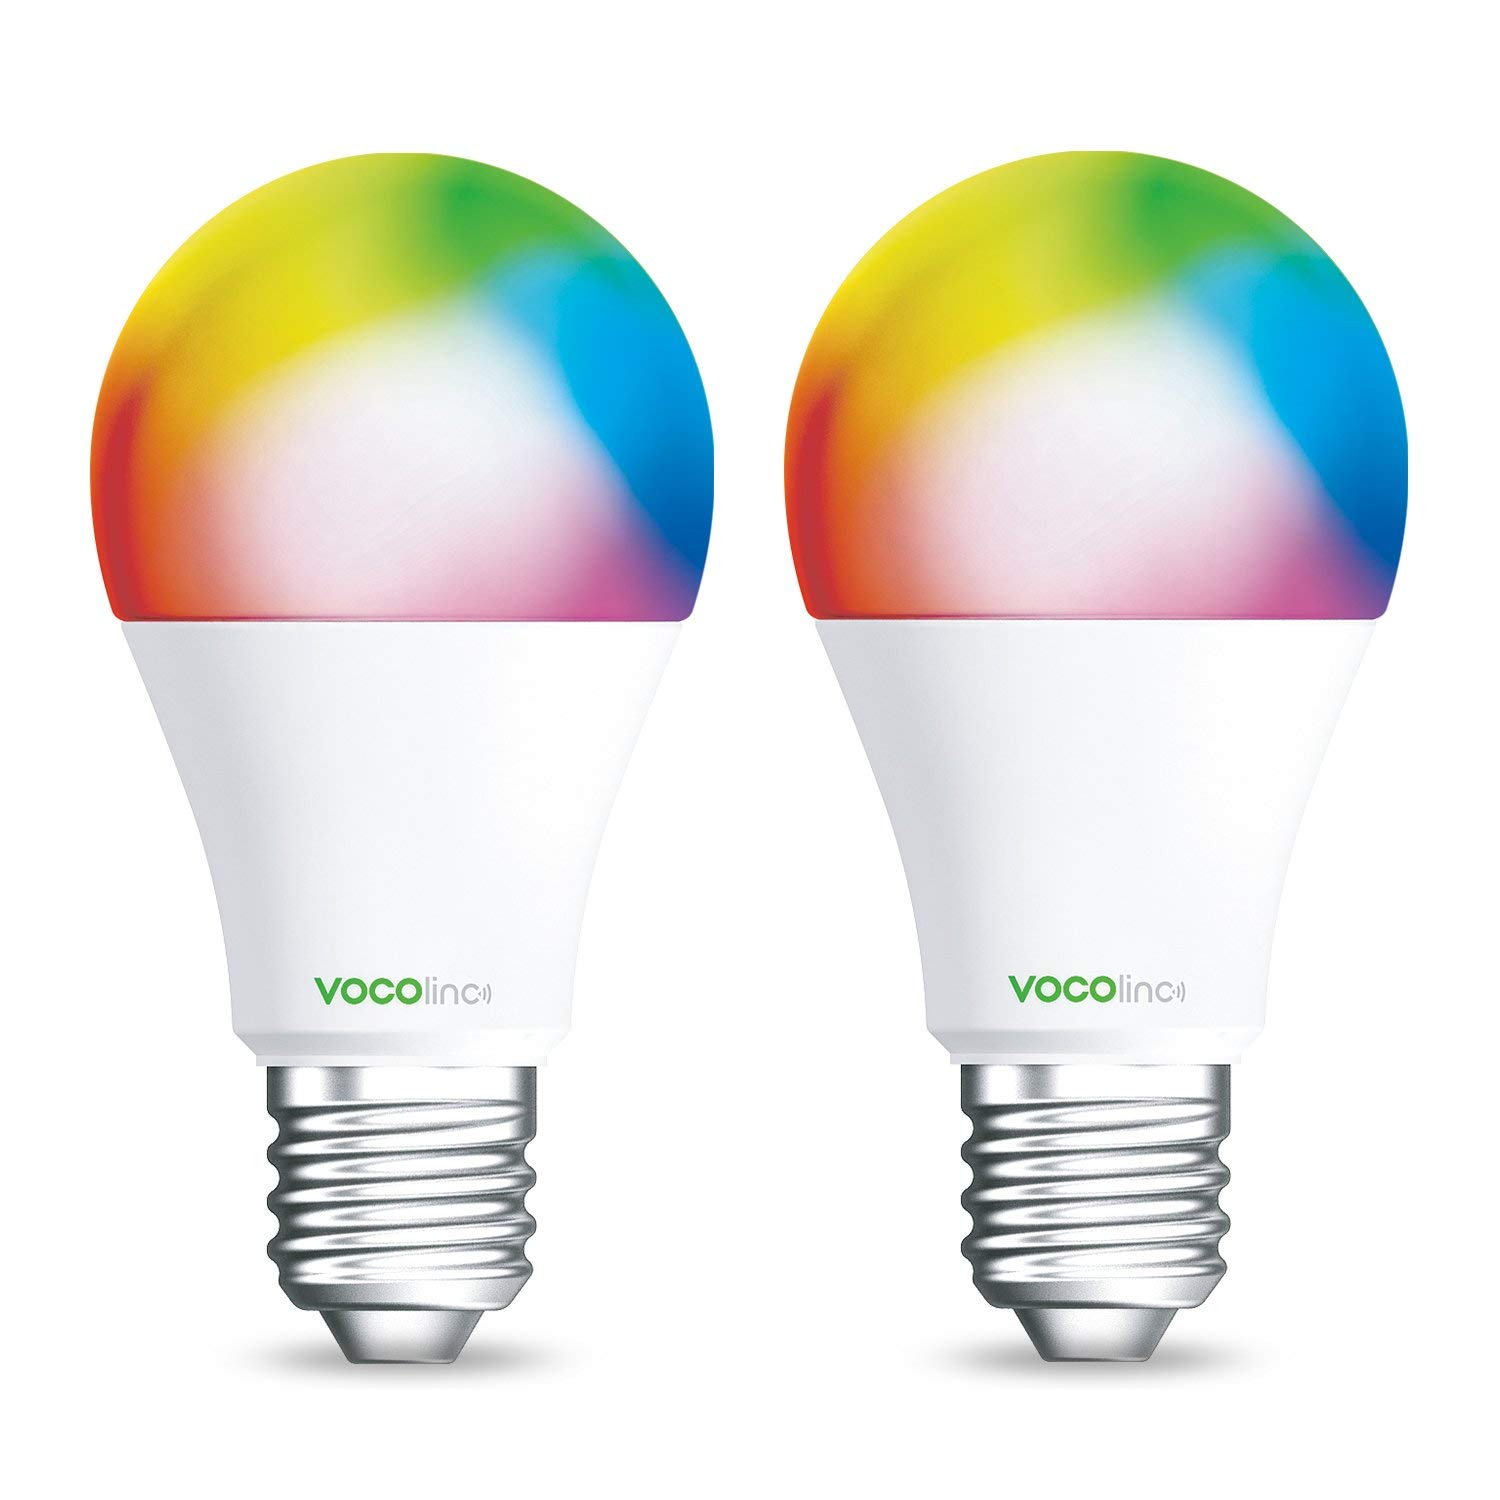 Vocolinc smart light bulbs make great holiday gifts for a person with chronic illness or disability.